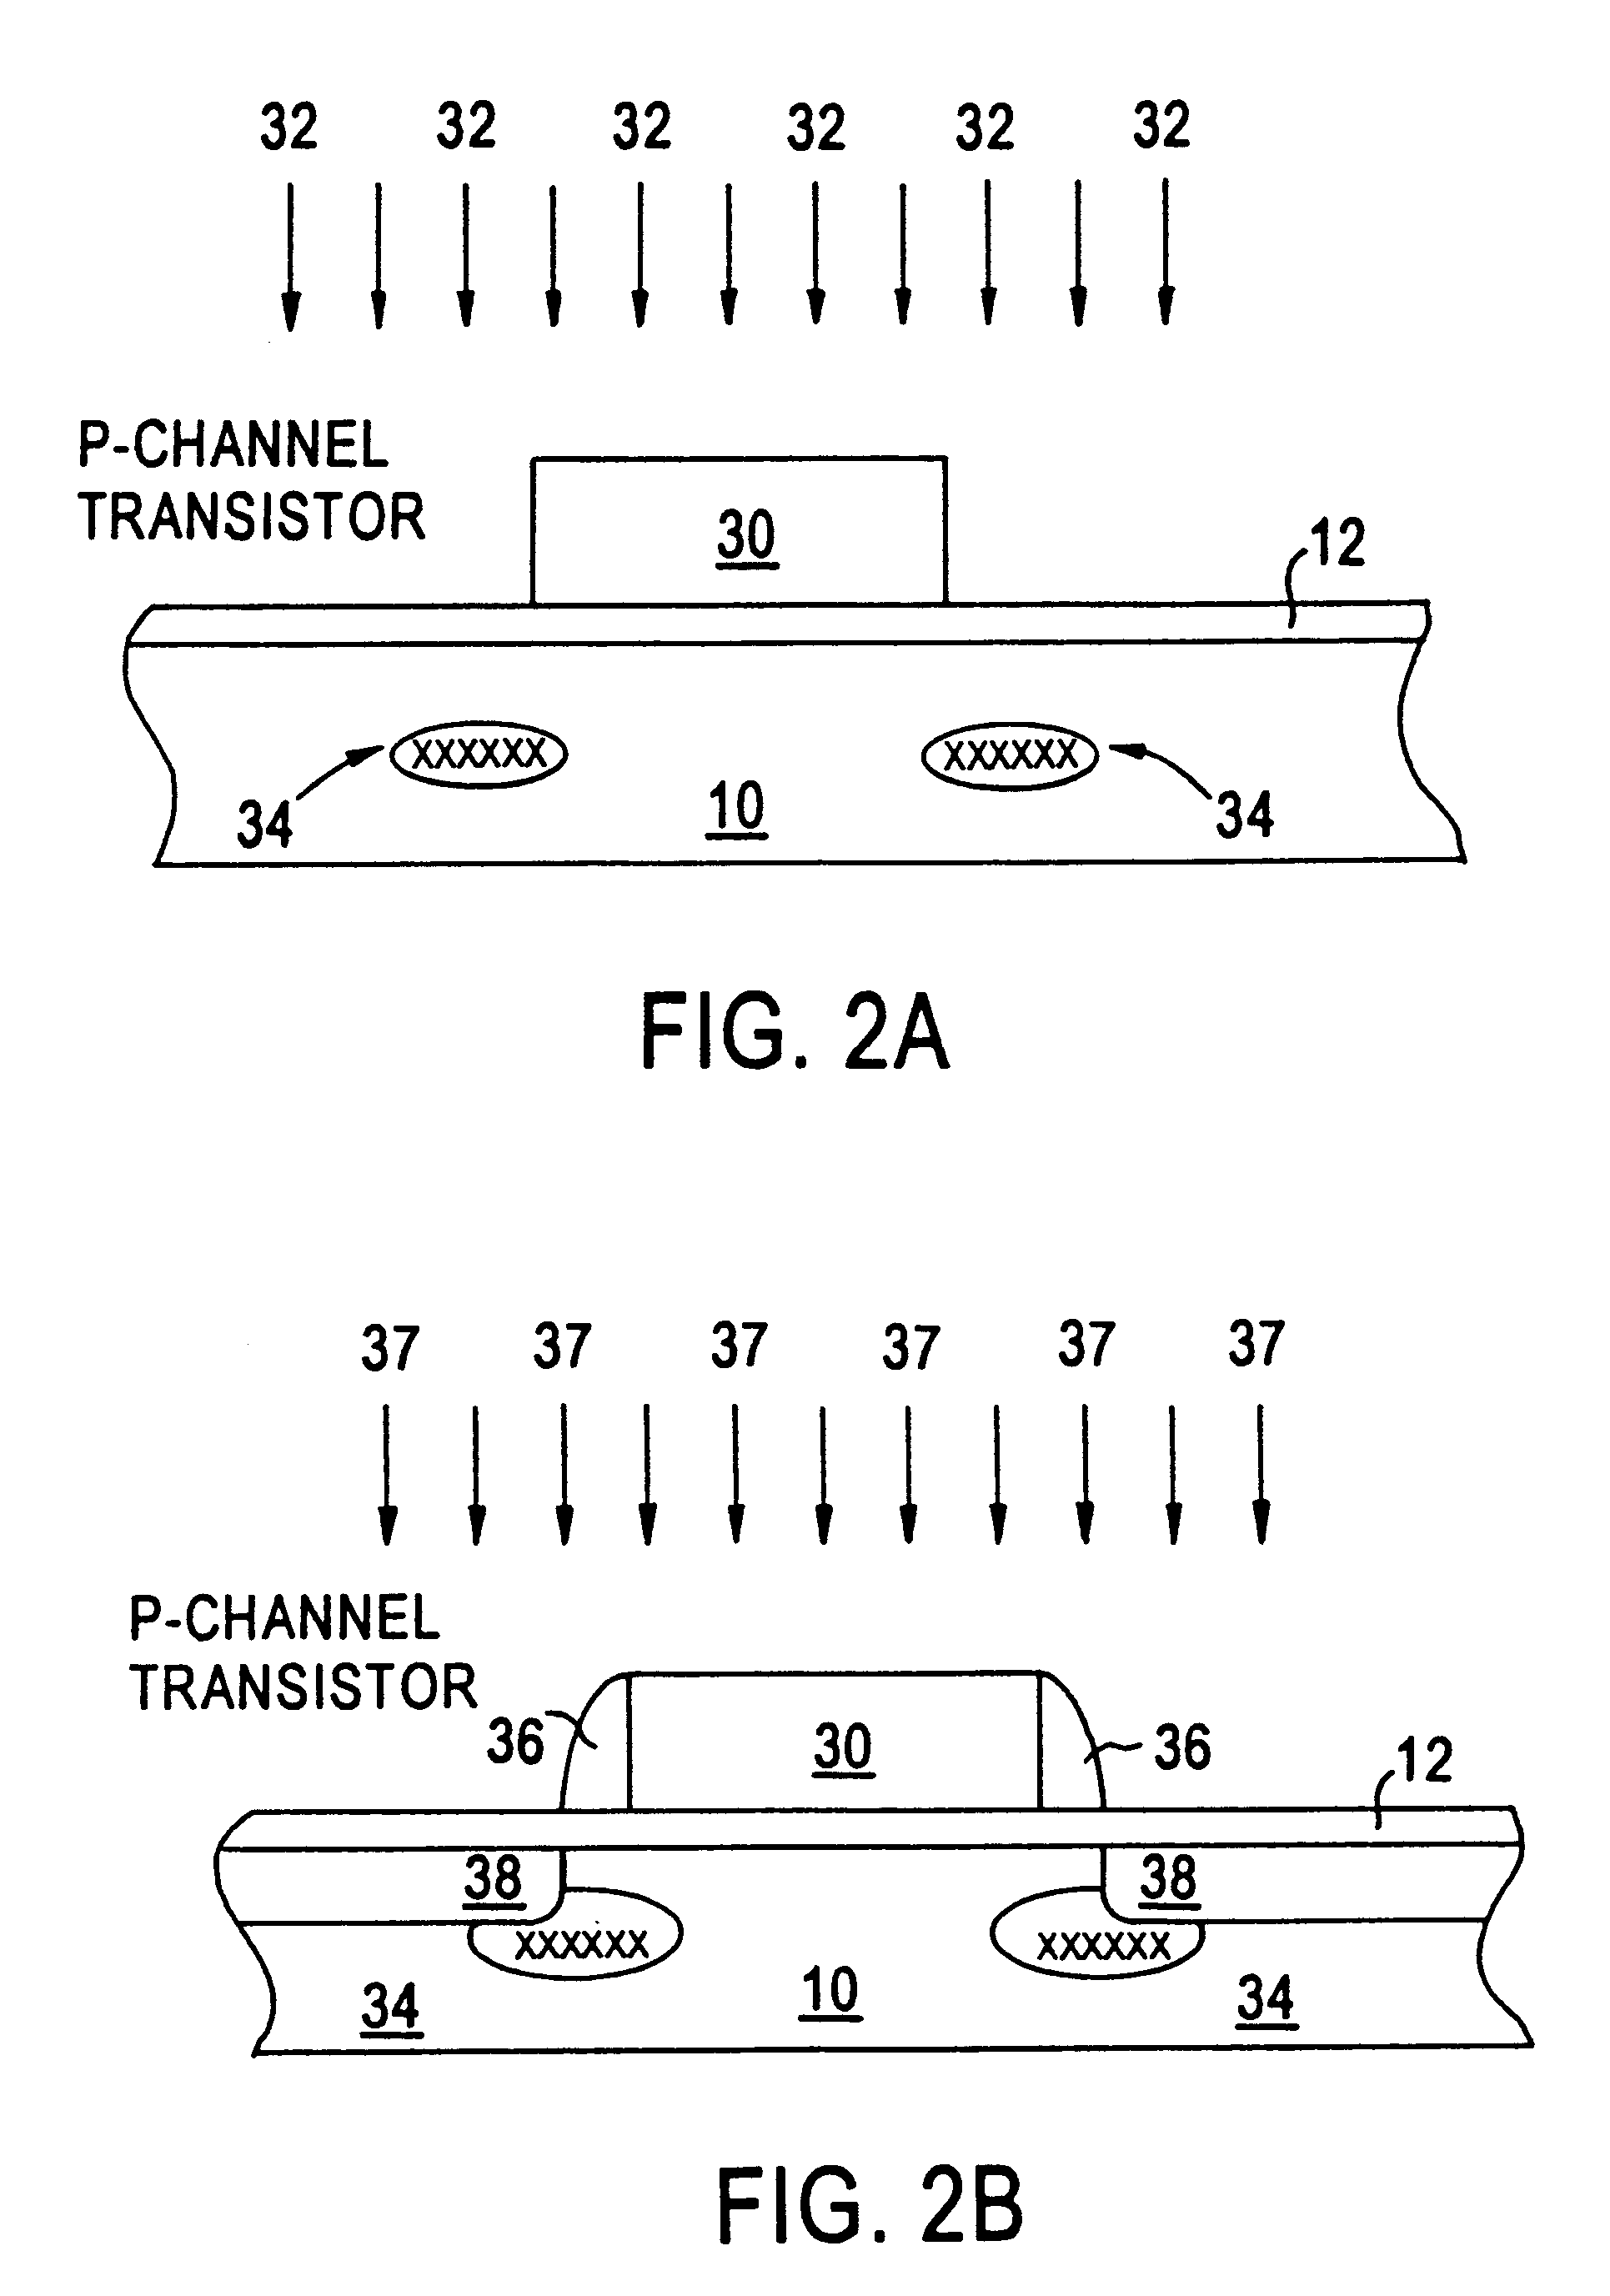 CMOS processing employing zero degree halo implant for P-channel transistor